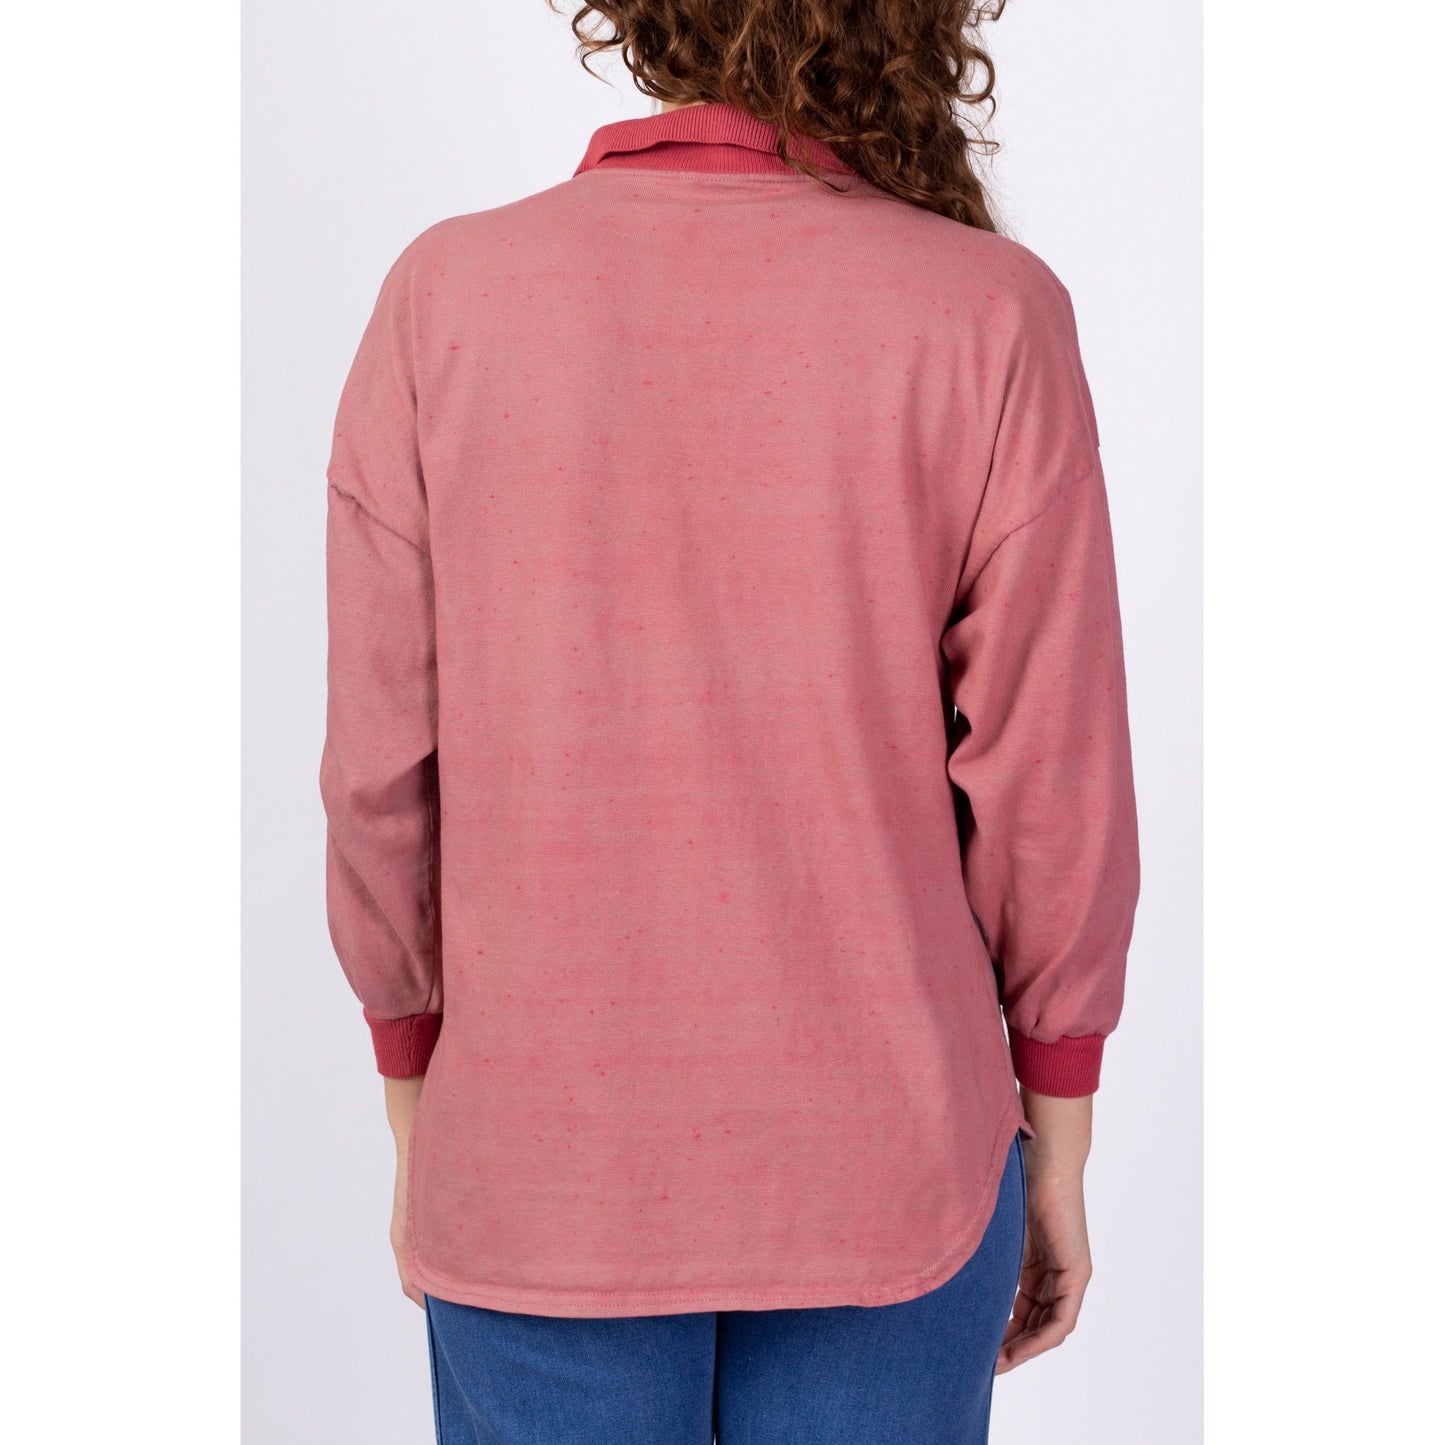 80s Rose Pink Dyed Henley Sweatshirt - Small 